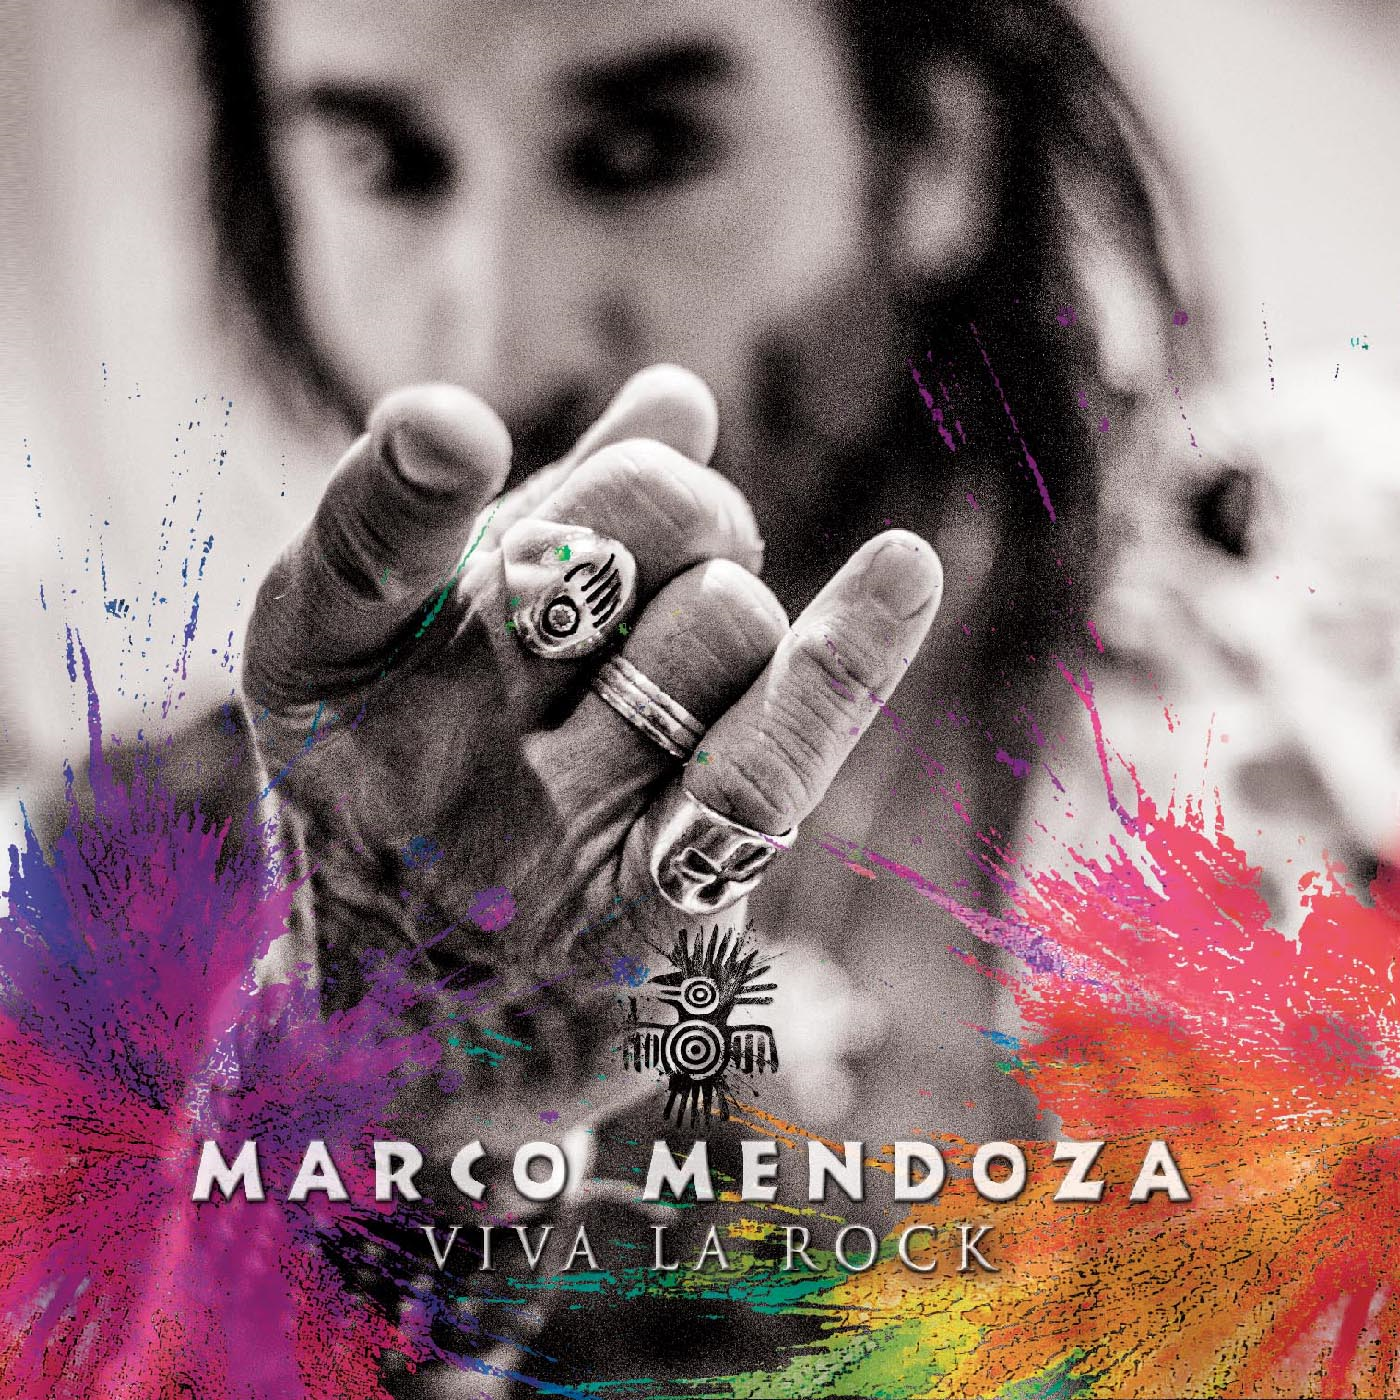 LET IT FLOW – an interview with MARCO MENDOZA